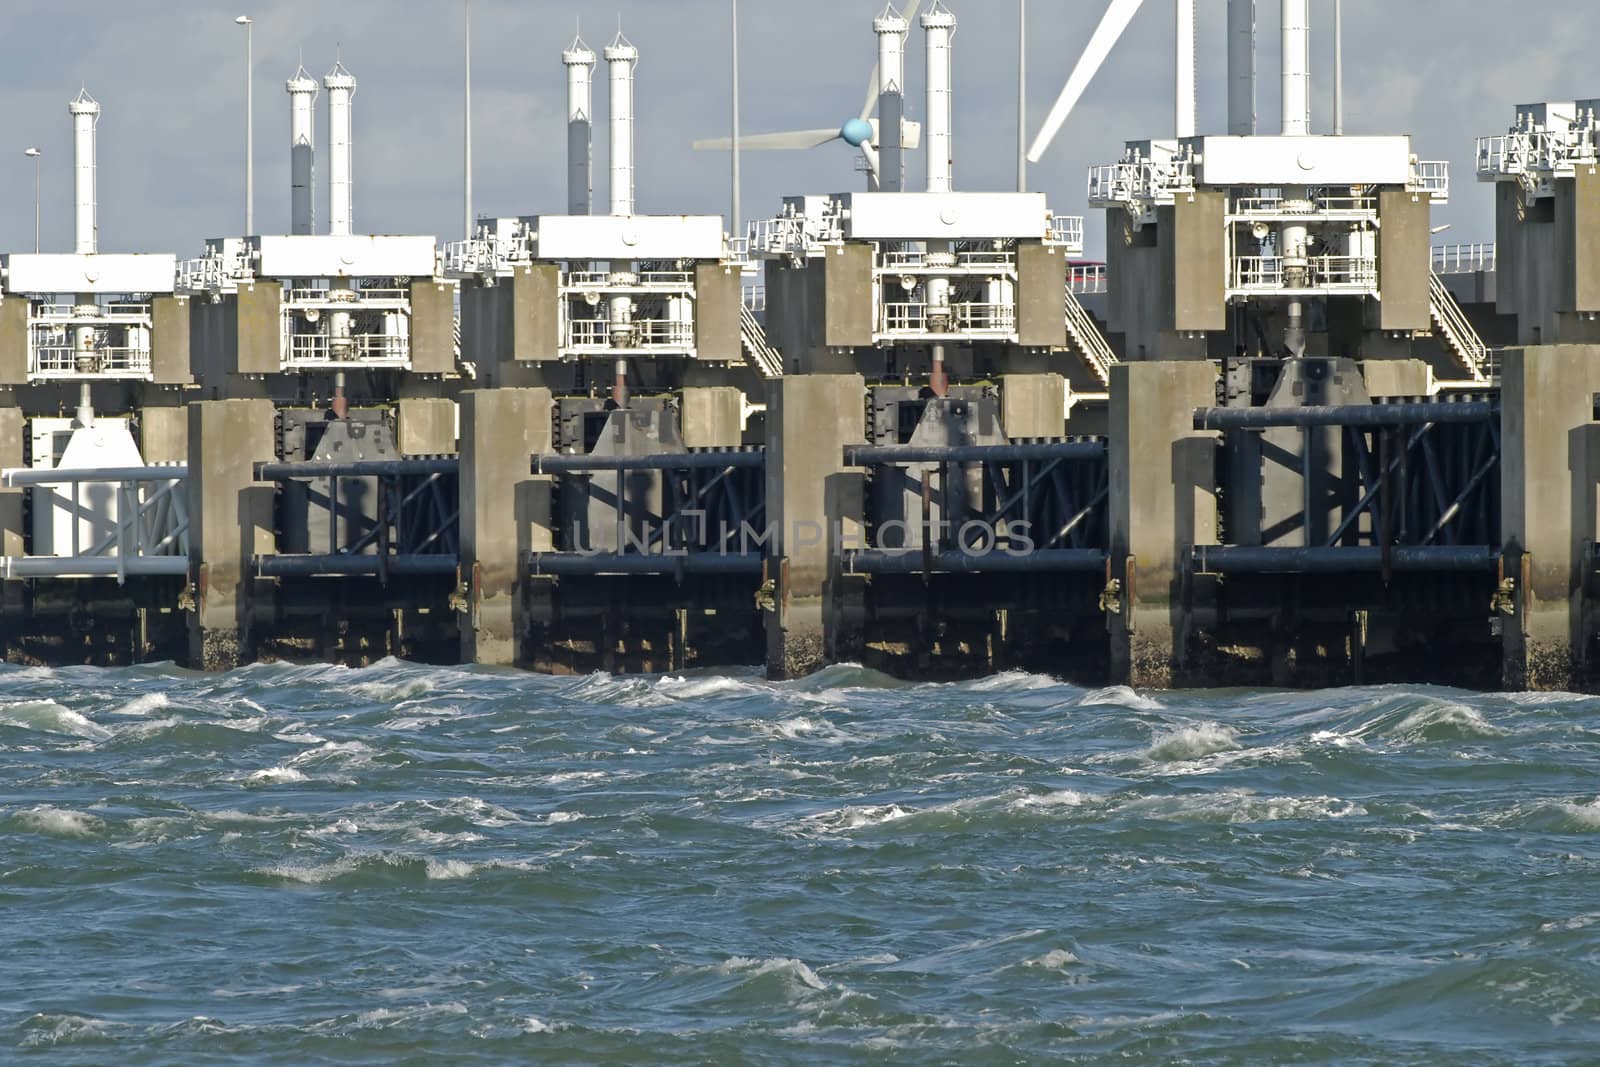 Storm surge barrier by Gertje